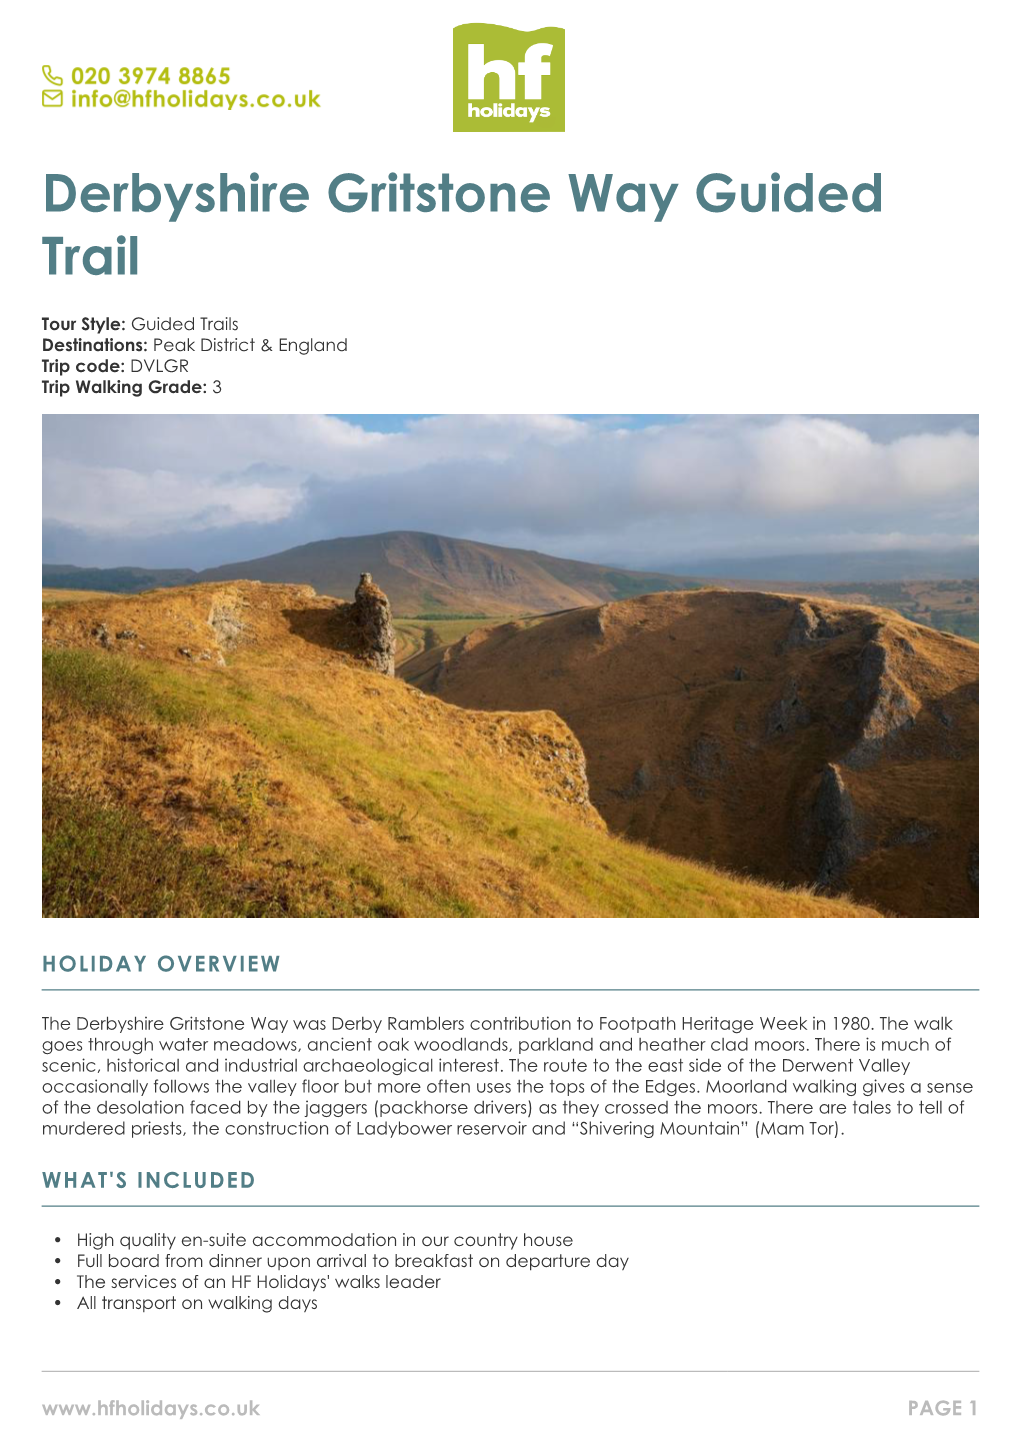 Derbyshire Gritstone Way Guided Trail